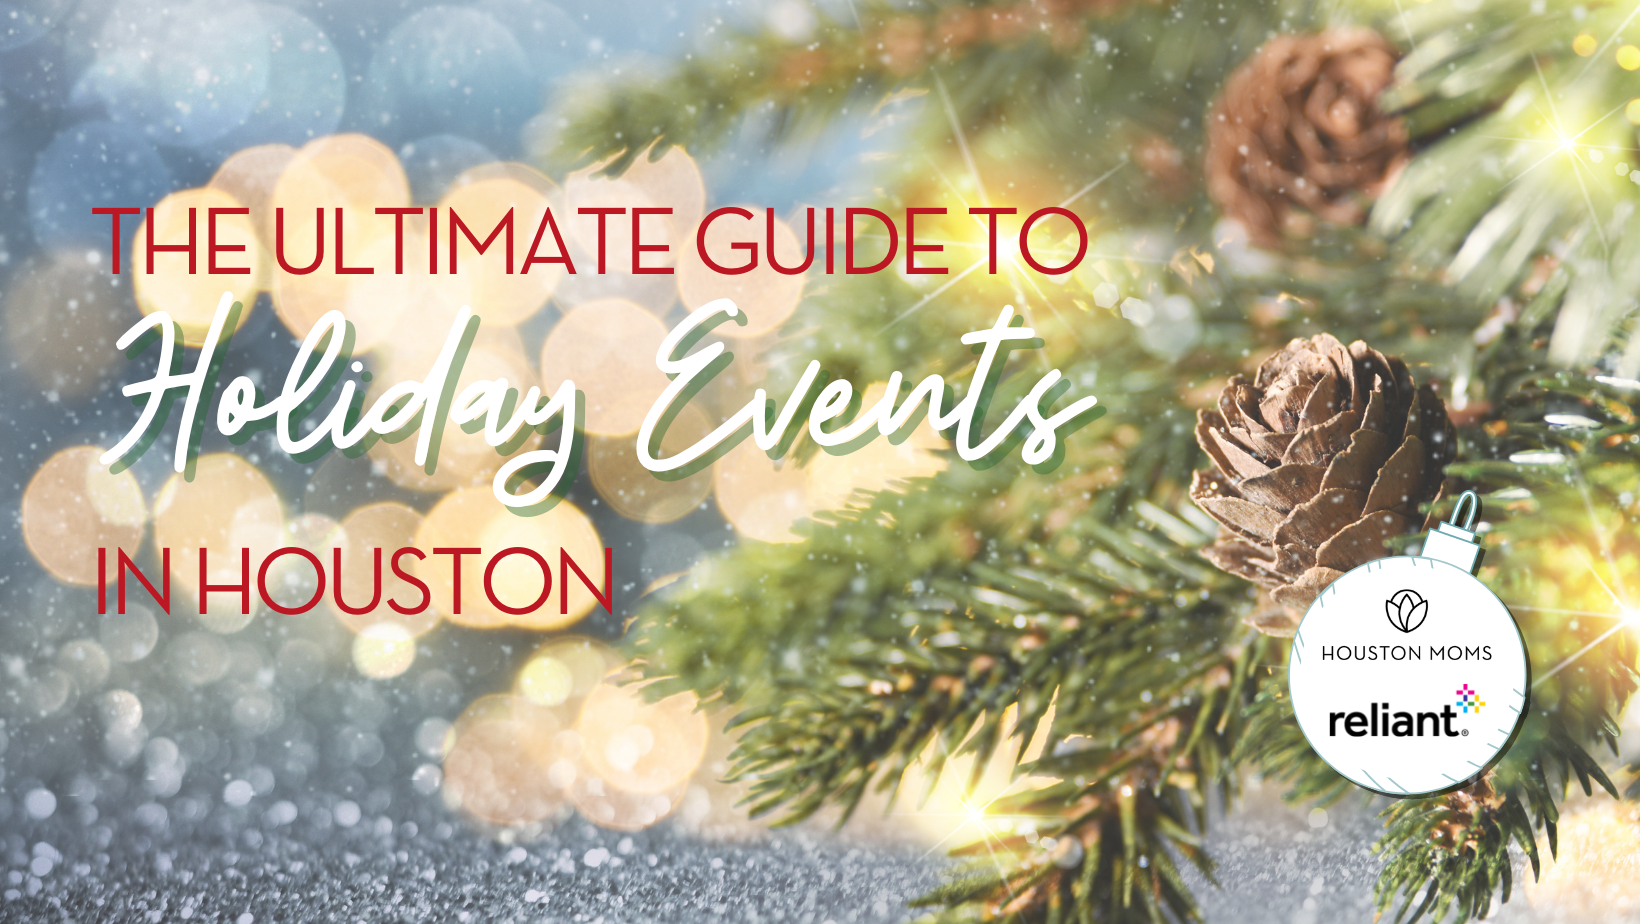 The ultimate Guide to Holiday Events in Houston. A photograph of a pine bough. Logo: Houston Moms and Reliant.